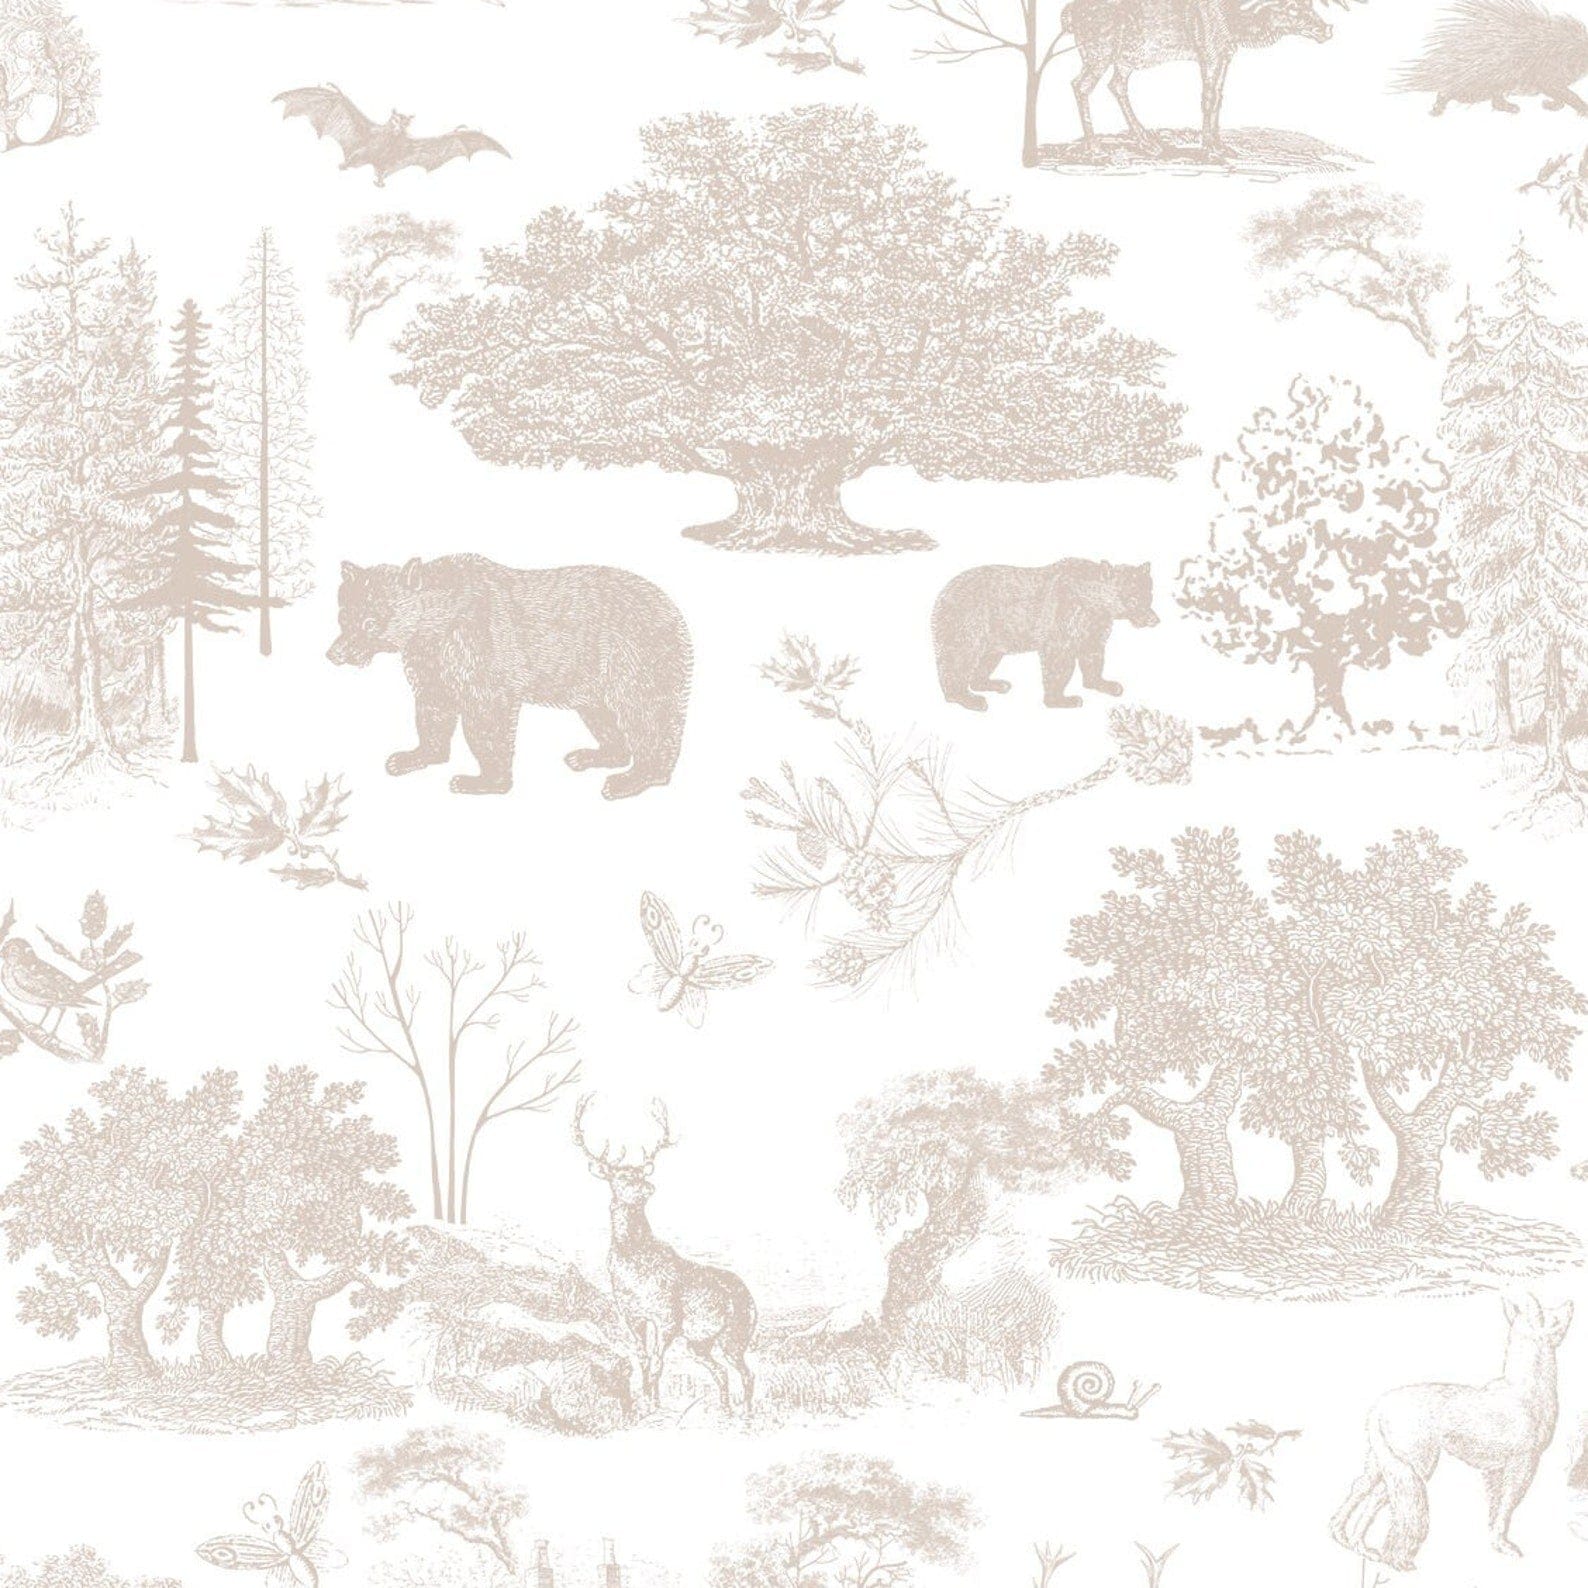 A close-up of the Vintage Neutral Toile Wildlife Wallpaper pattern, highlighting its intricate illustrations of wildlife and nature scenes in beige on a white background. The detailed design adds a touch of elegance and sophistication to any room.